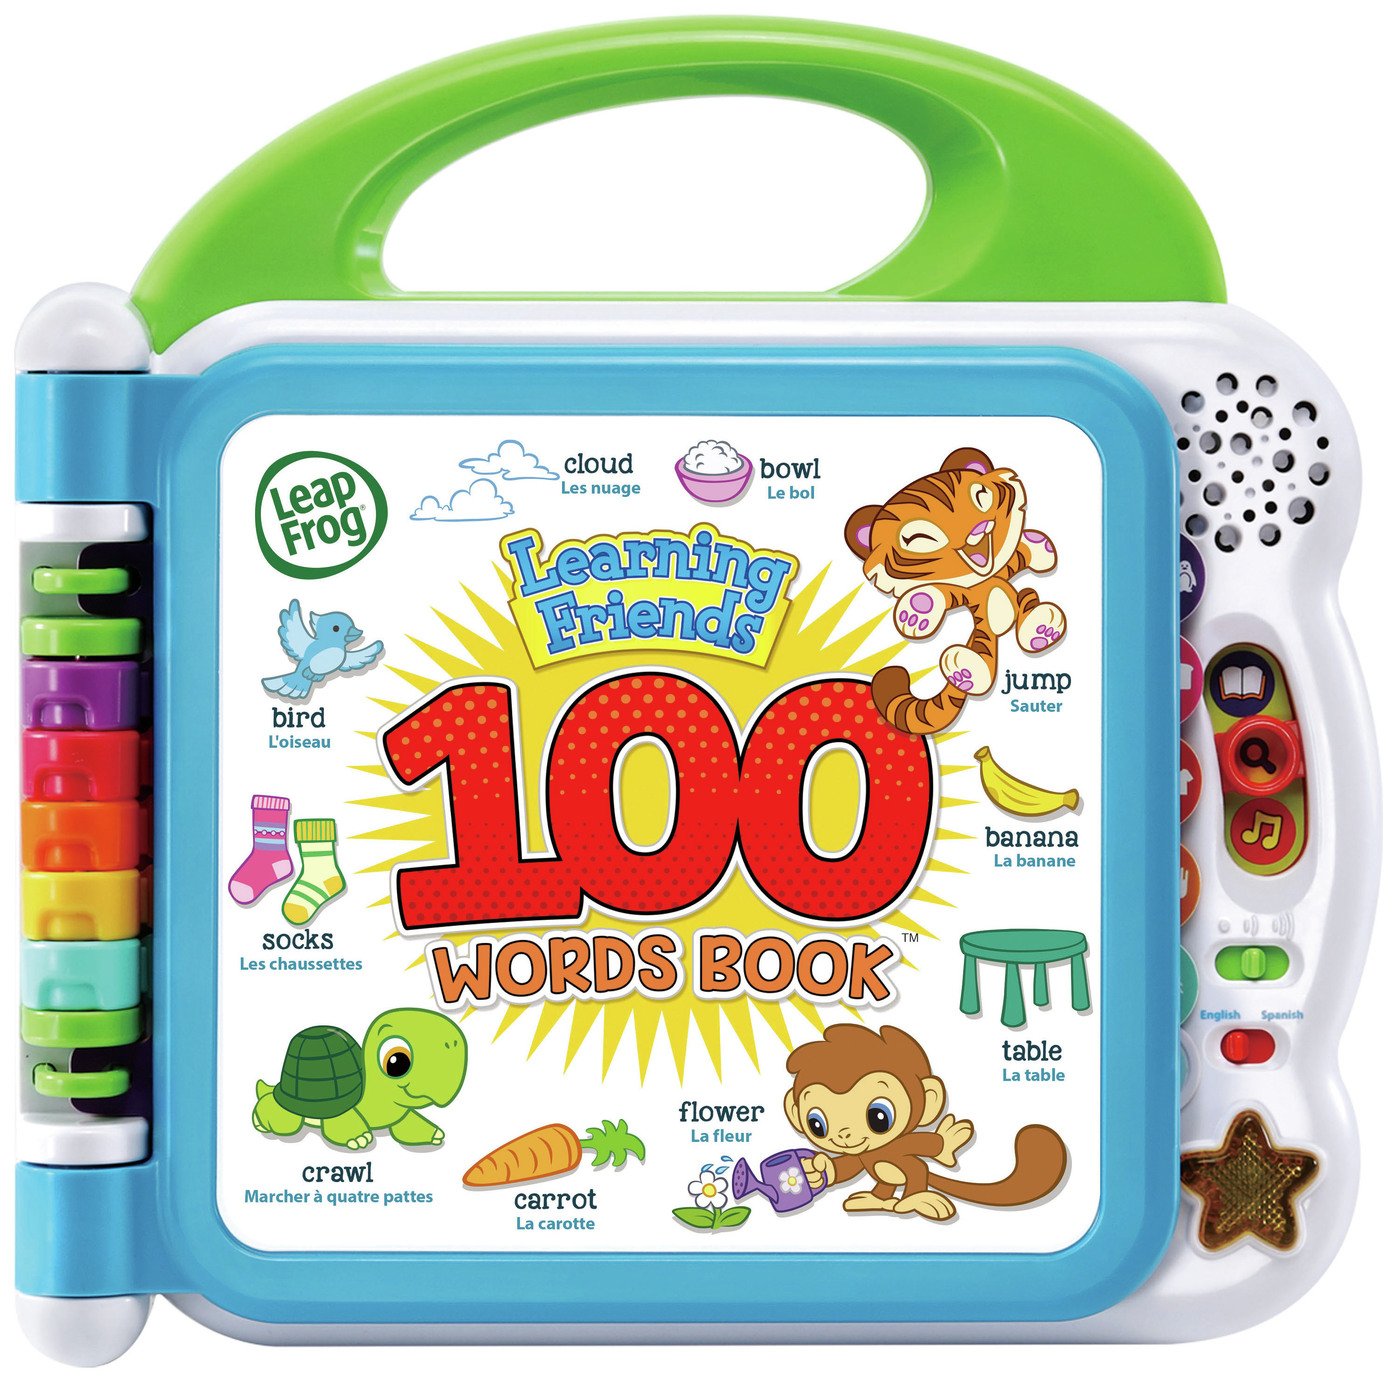 leapfrog 100 words book review